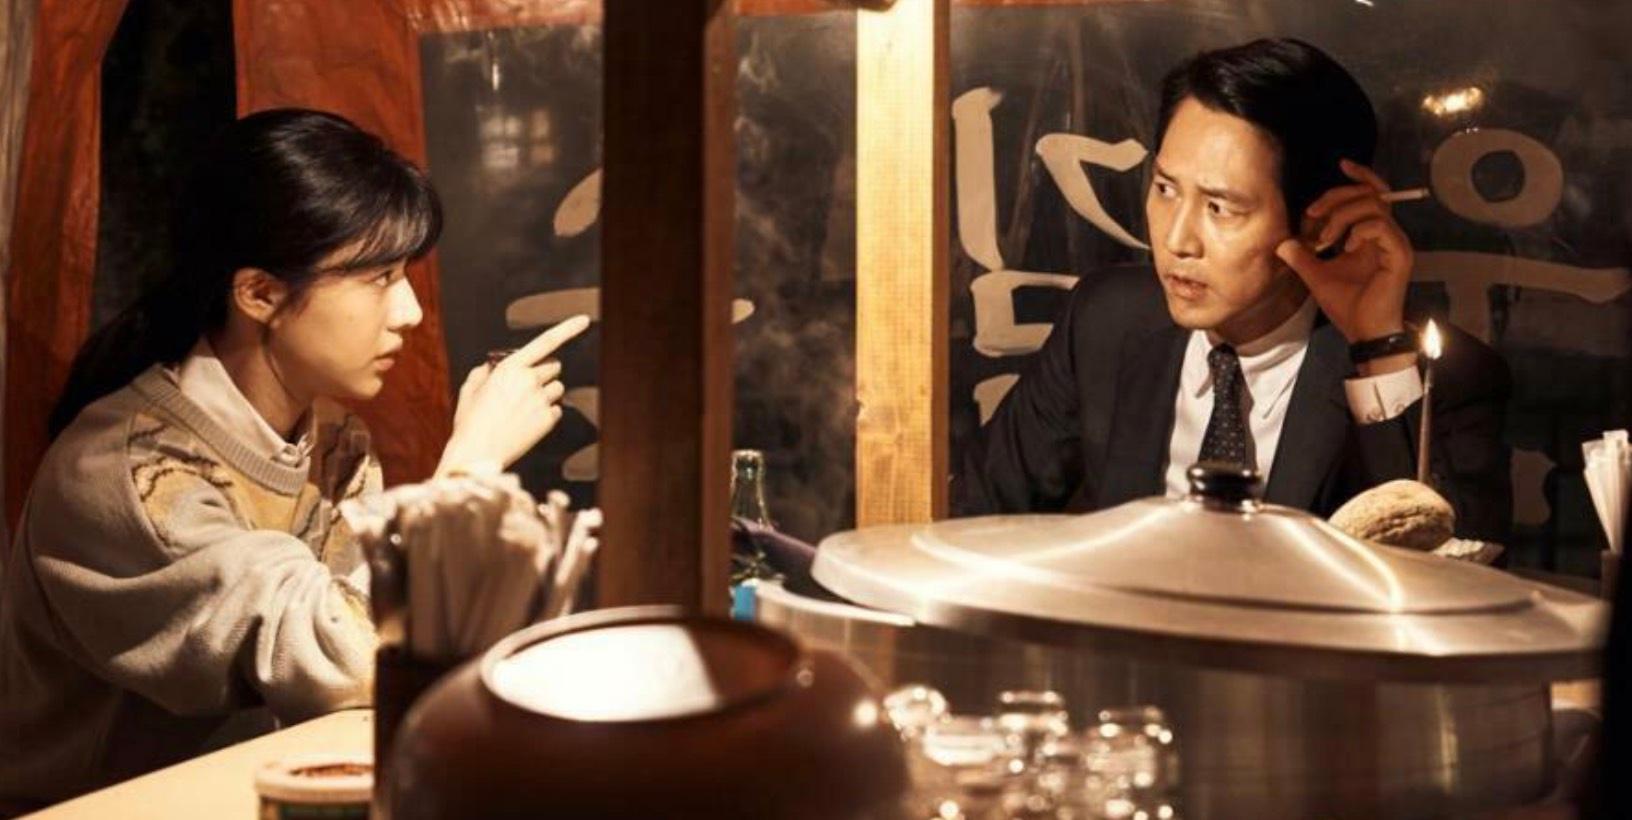 A Korean Film Festival is happening in Abu Dhabi this month